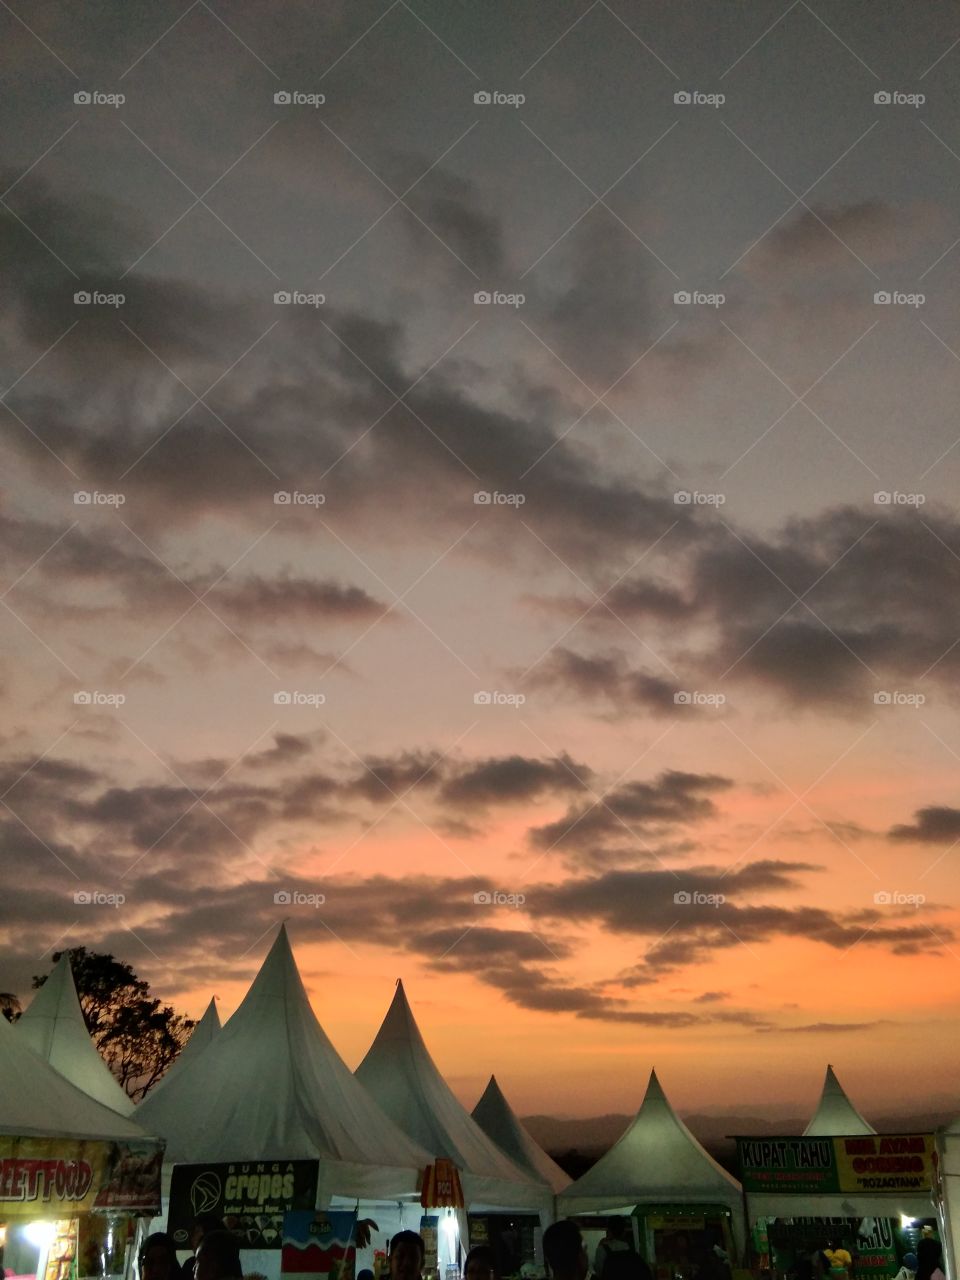 view of the tent with beautiful sunset